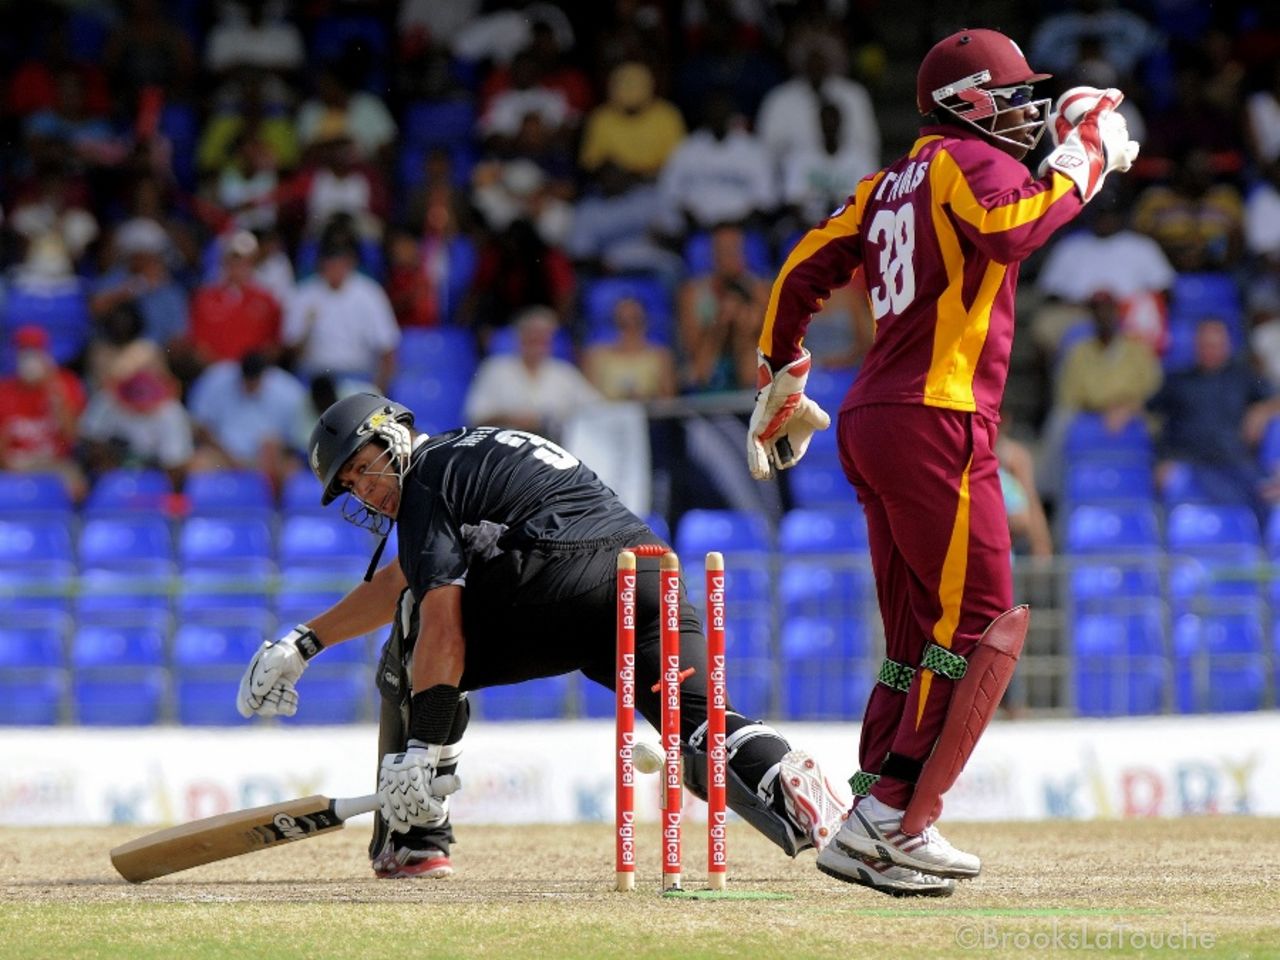 Ross Taylor is stumped by Devon Thomas, West Indies v New Zealand, 5th ODI, Basseterre, July 16, 2012